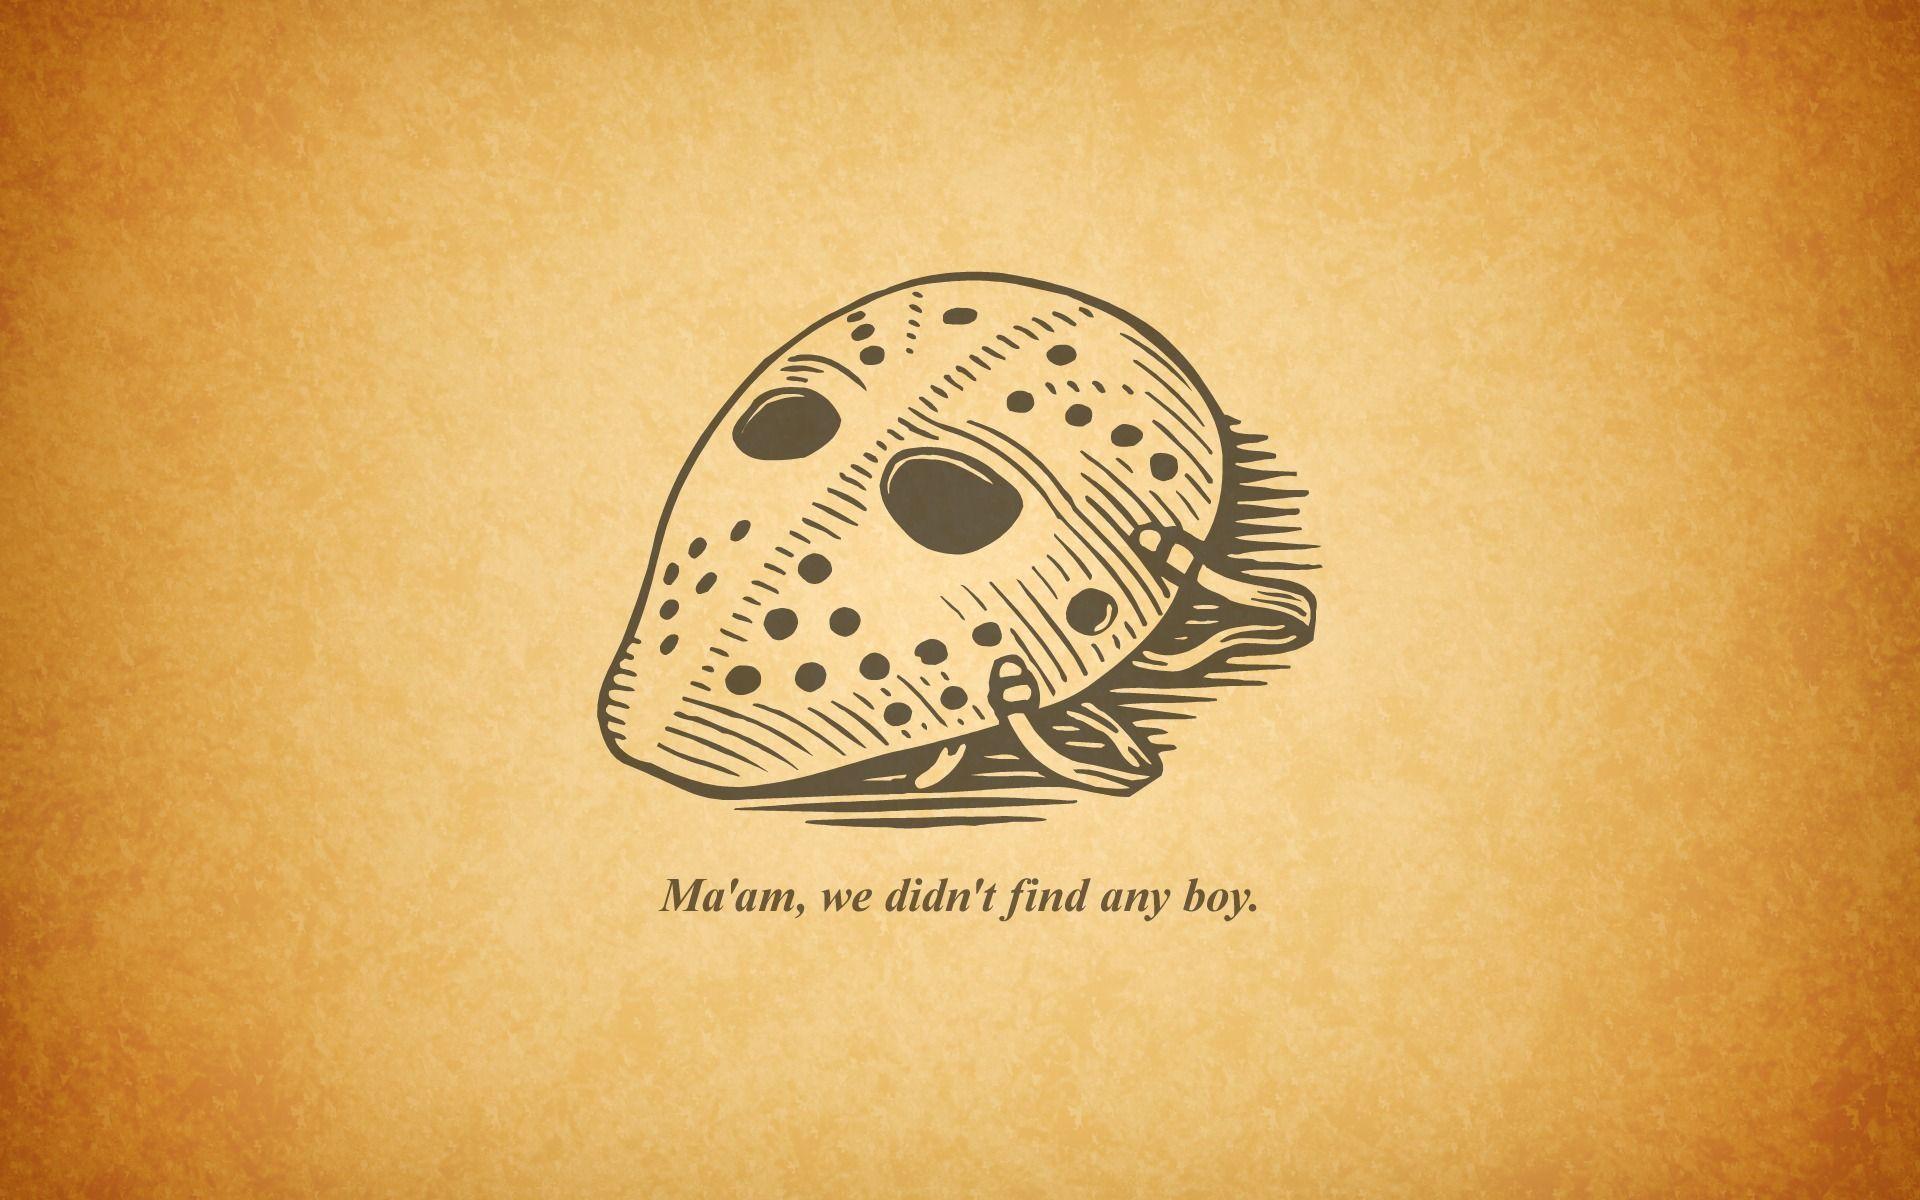 Friday the 13th quote Wallpaper #